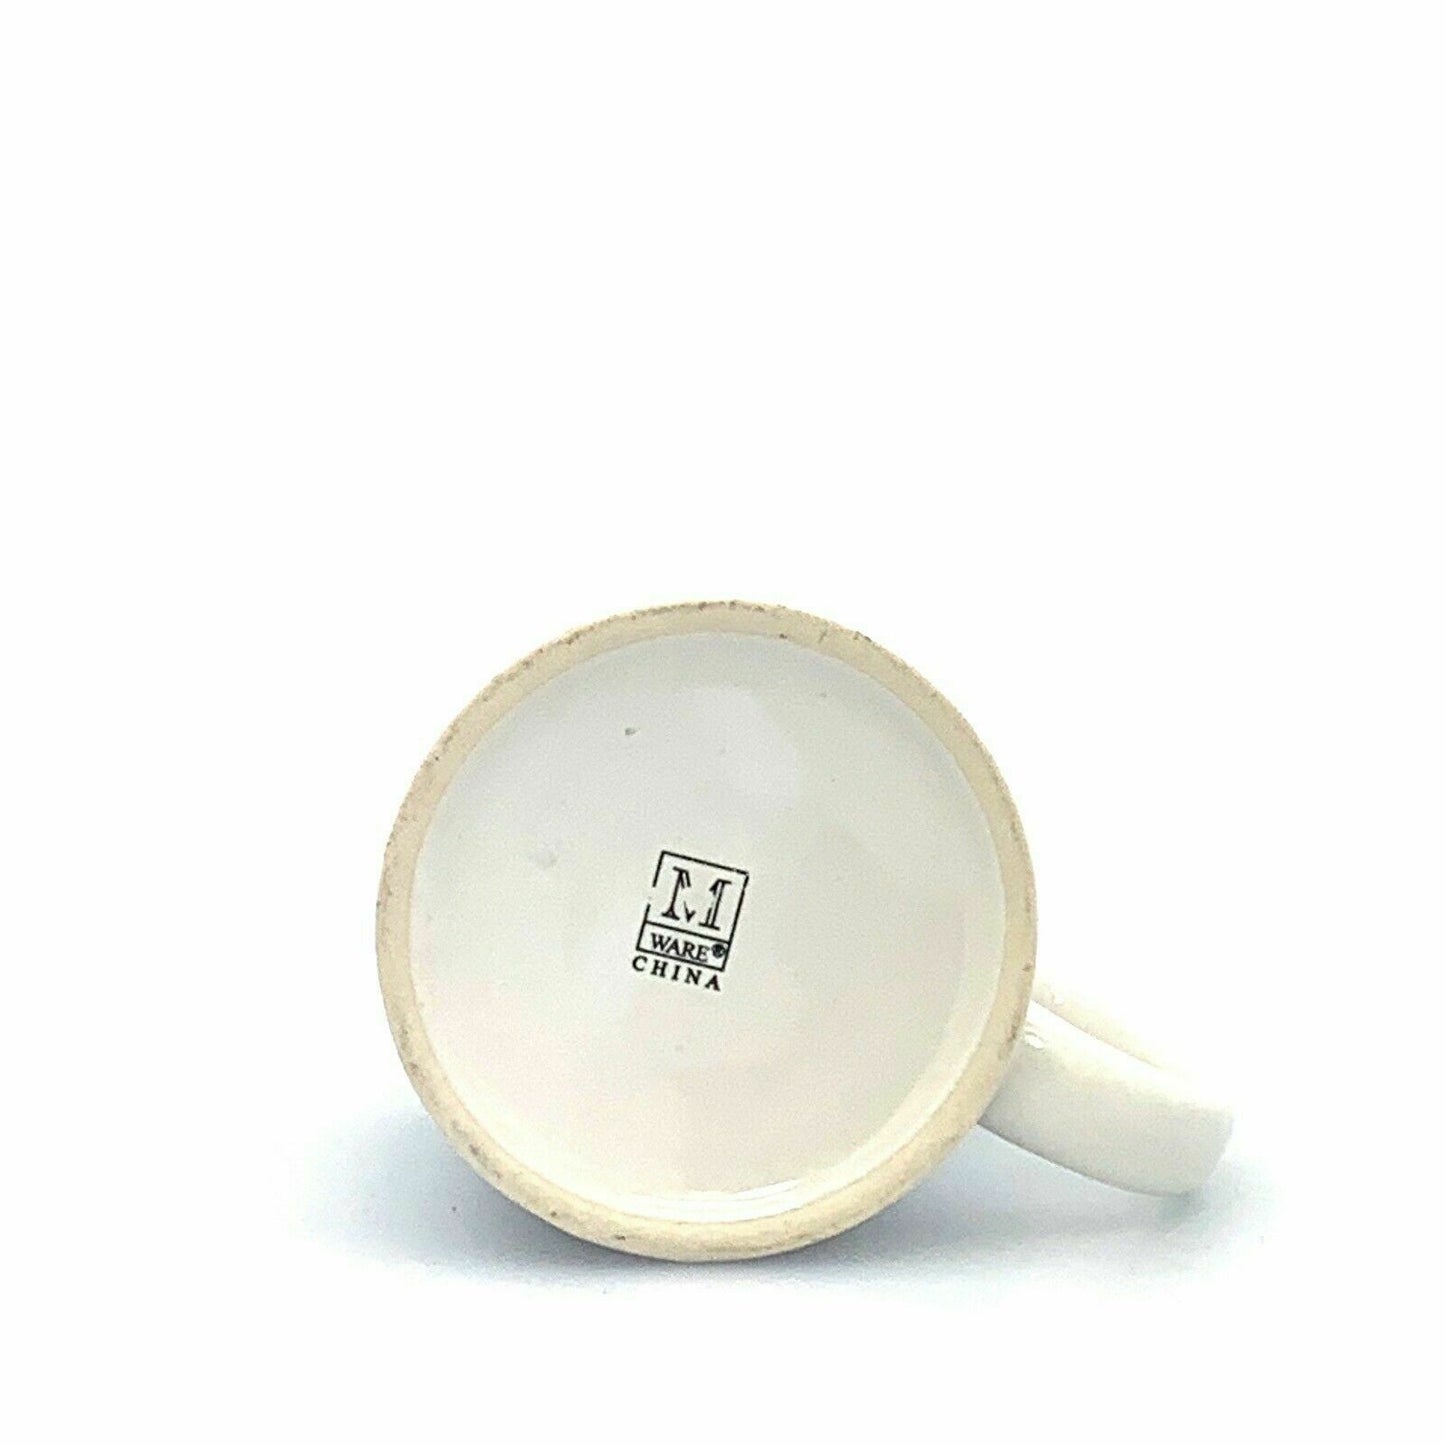 UNDECIDED Voter Ceramic Coffee Cup, White - 10oz